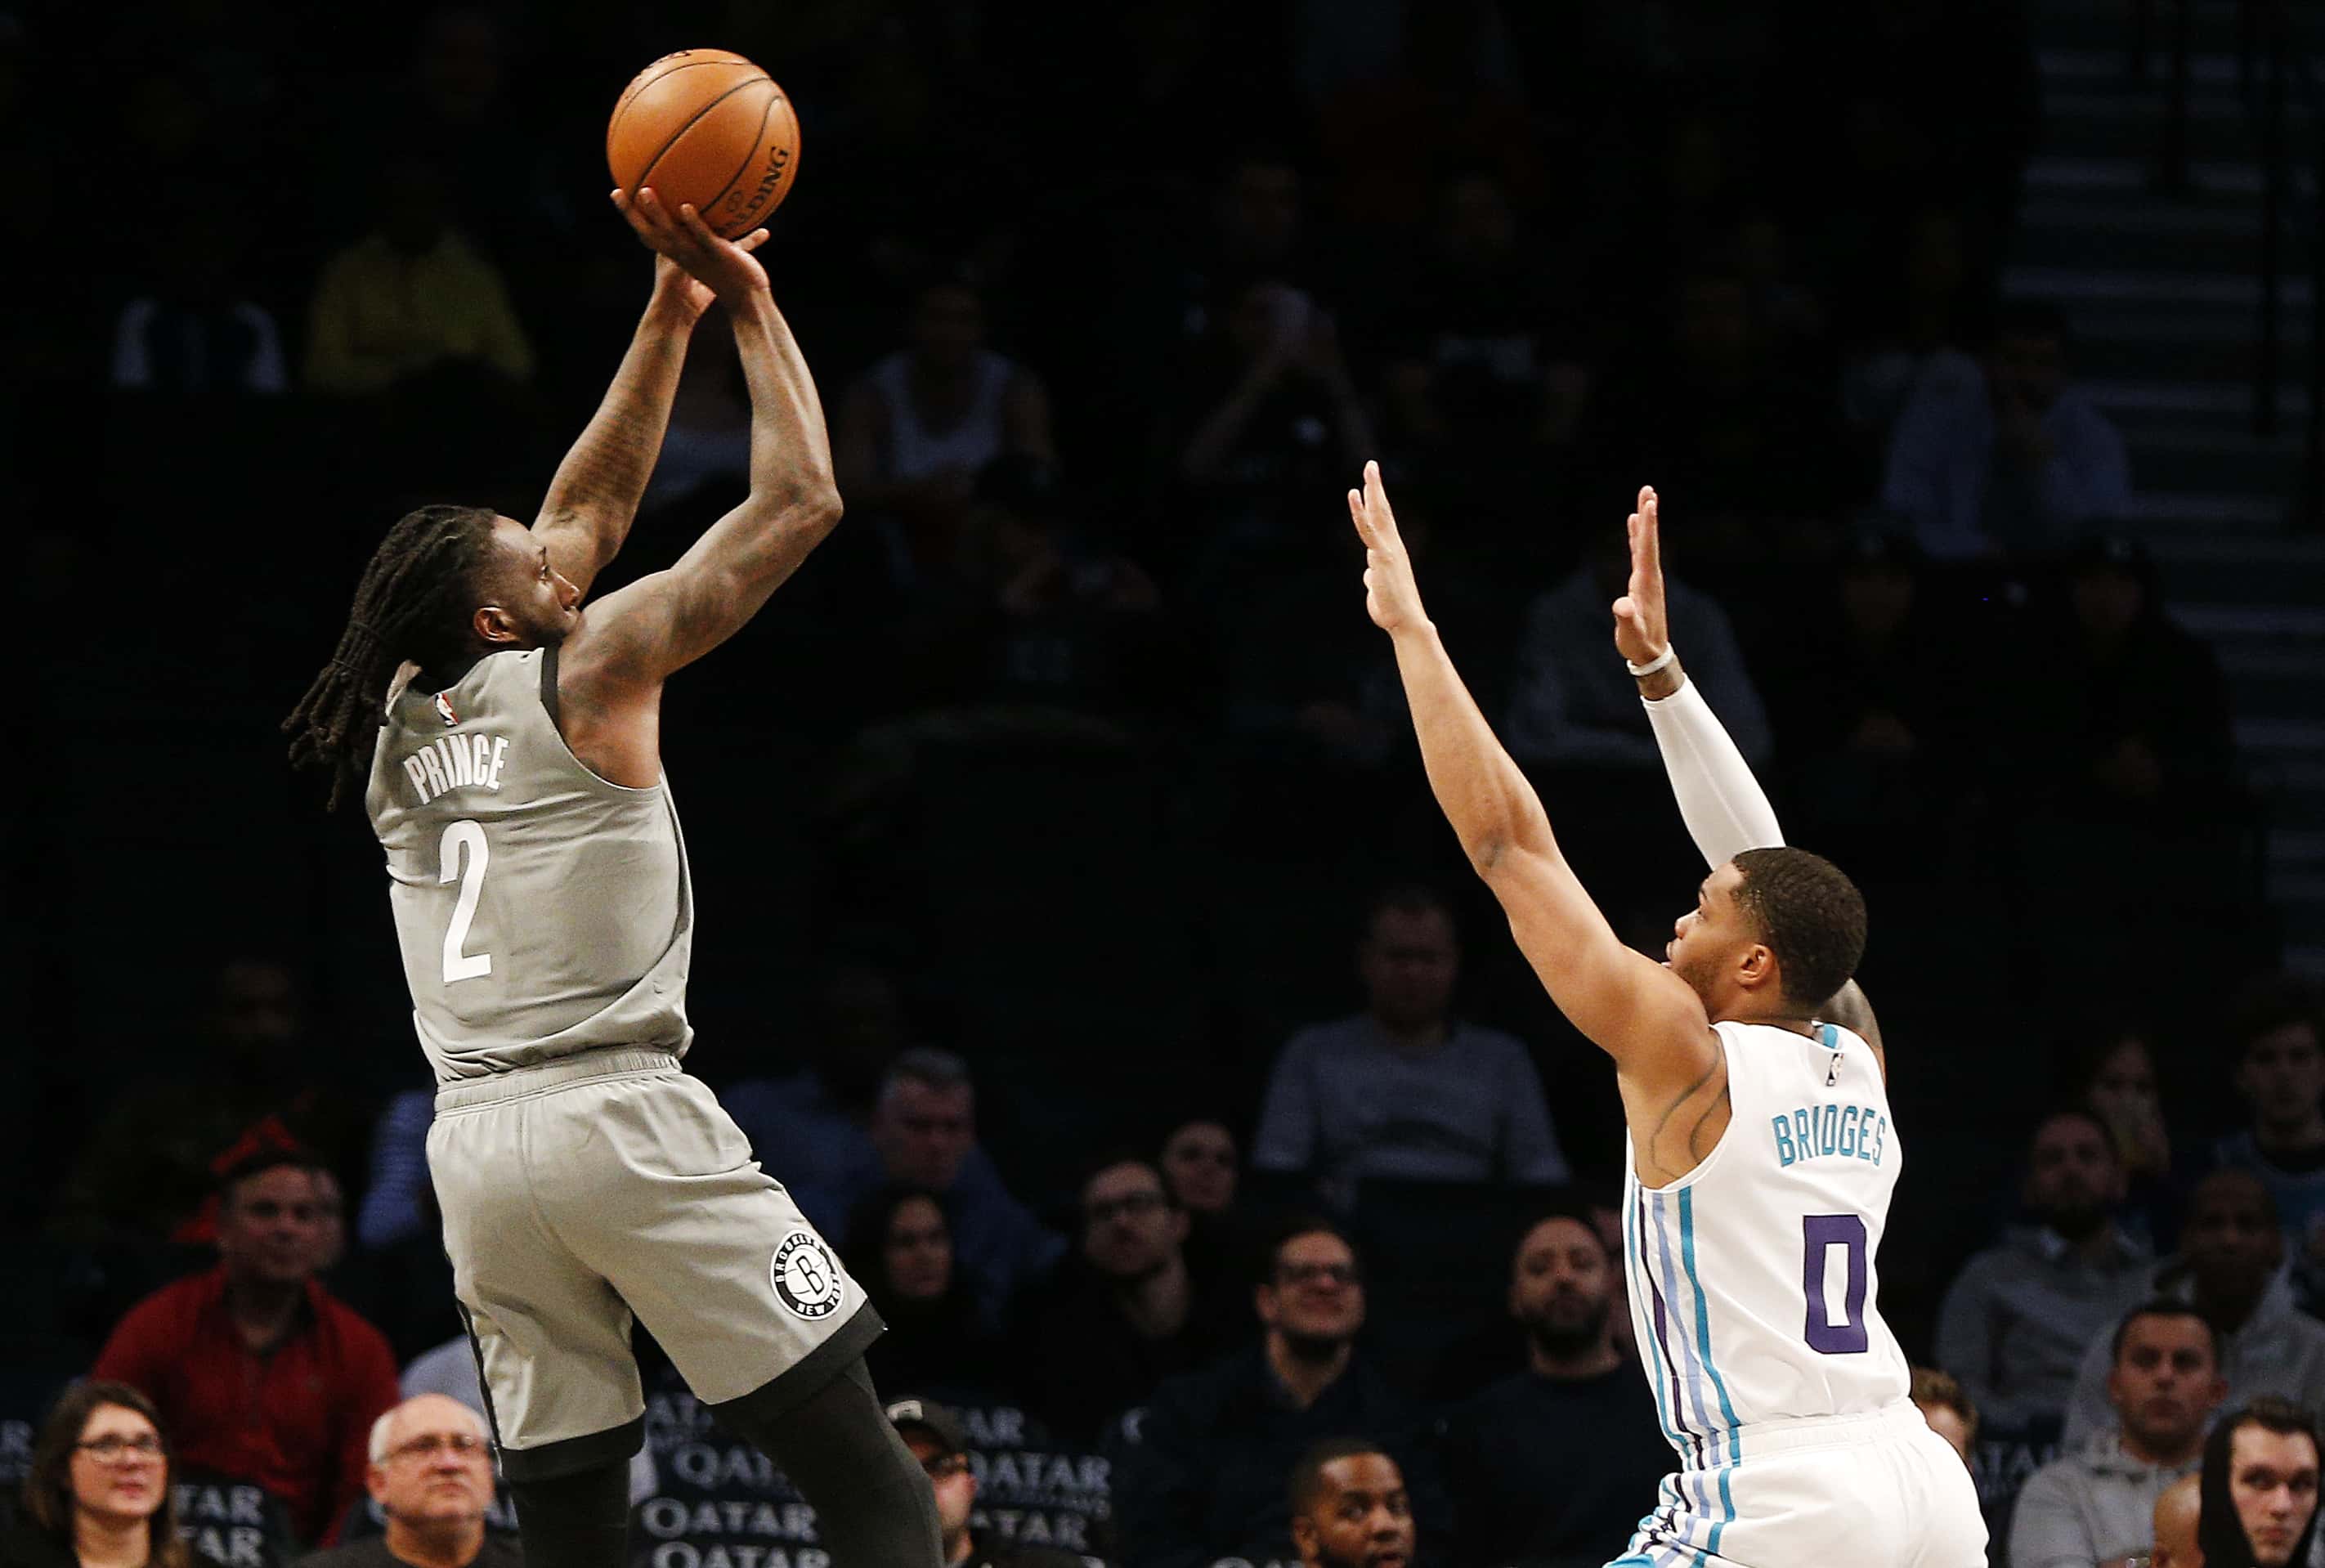 Nov 20, 2019; Brooklyn, NY, USA; Brooklyn Nets forward Taurean Prince (2) shoots while being defended by Charlotte Hornets forward Miles Bridges (0) during the first half at Barclays Center. Mandatory Credit: Andy Marlin-USA TODAY Sports